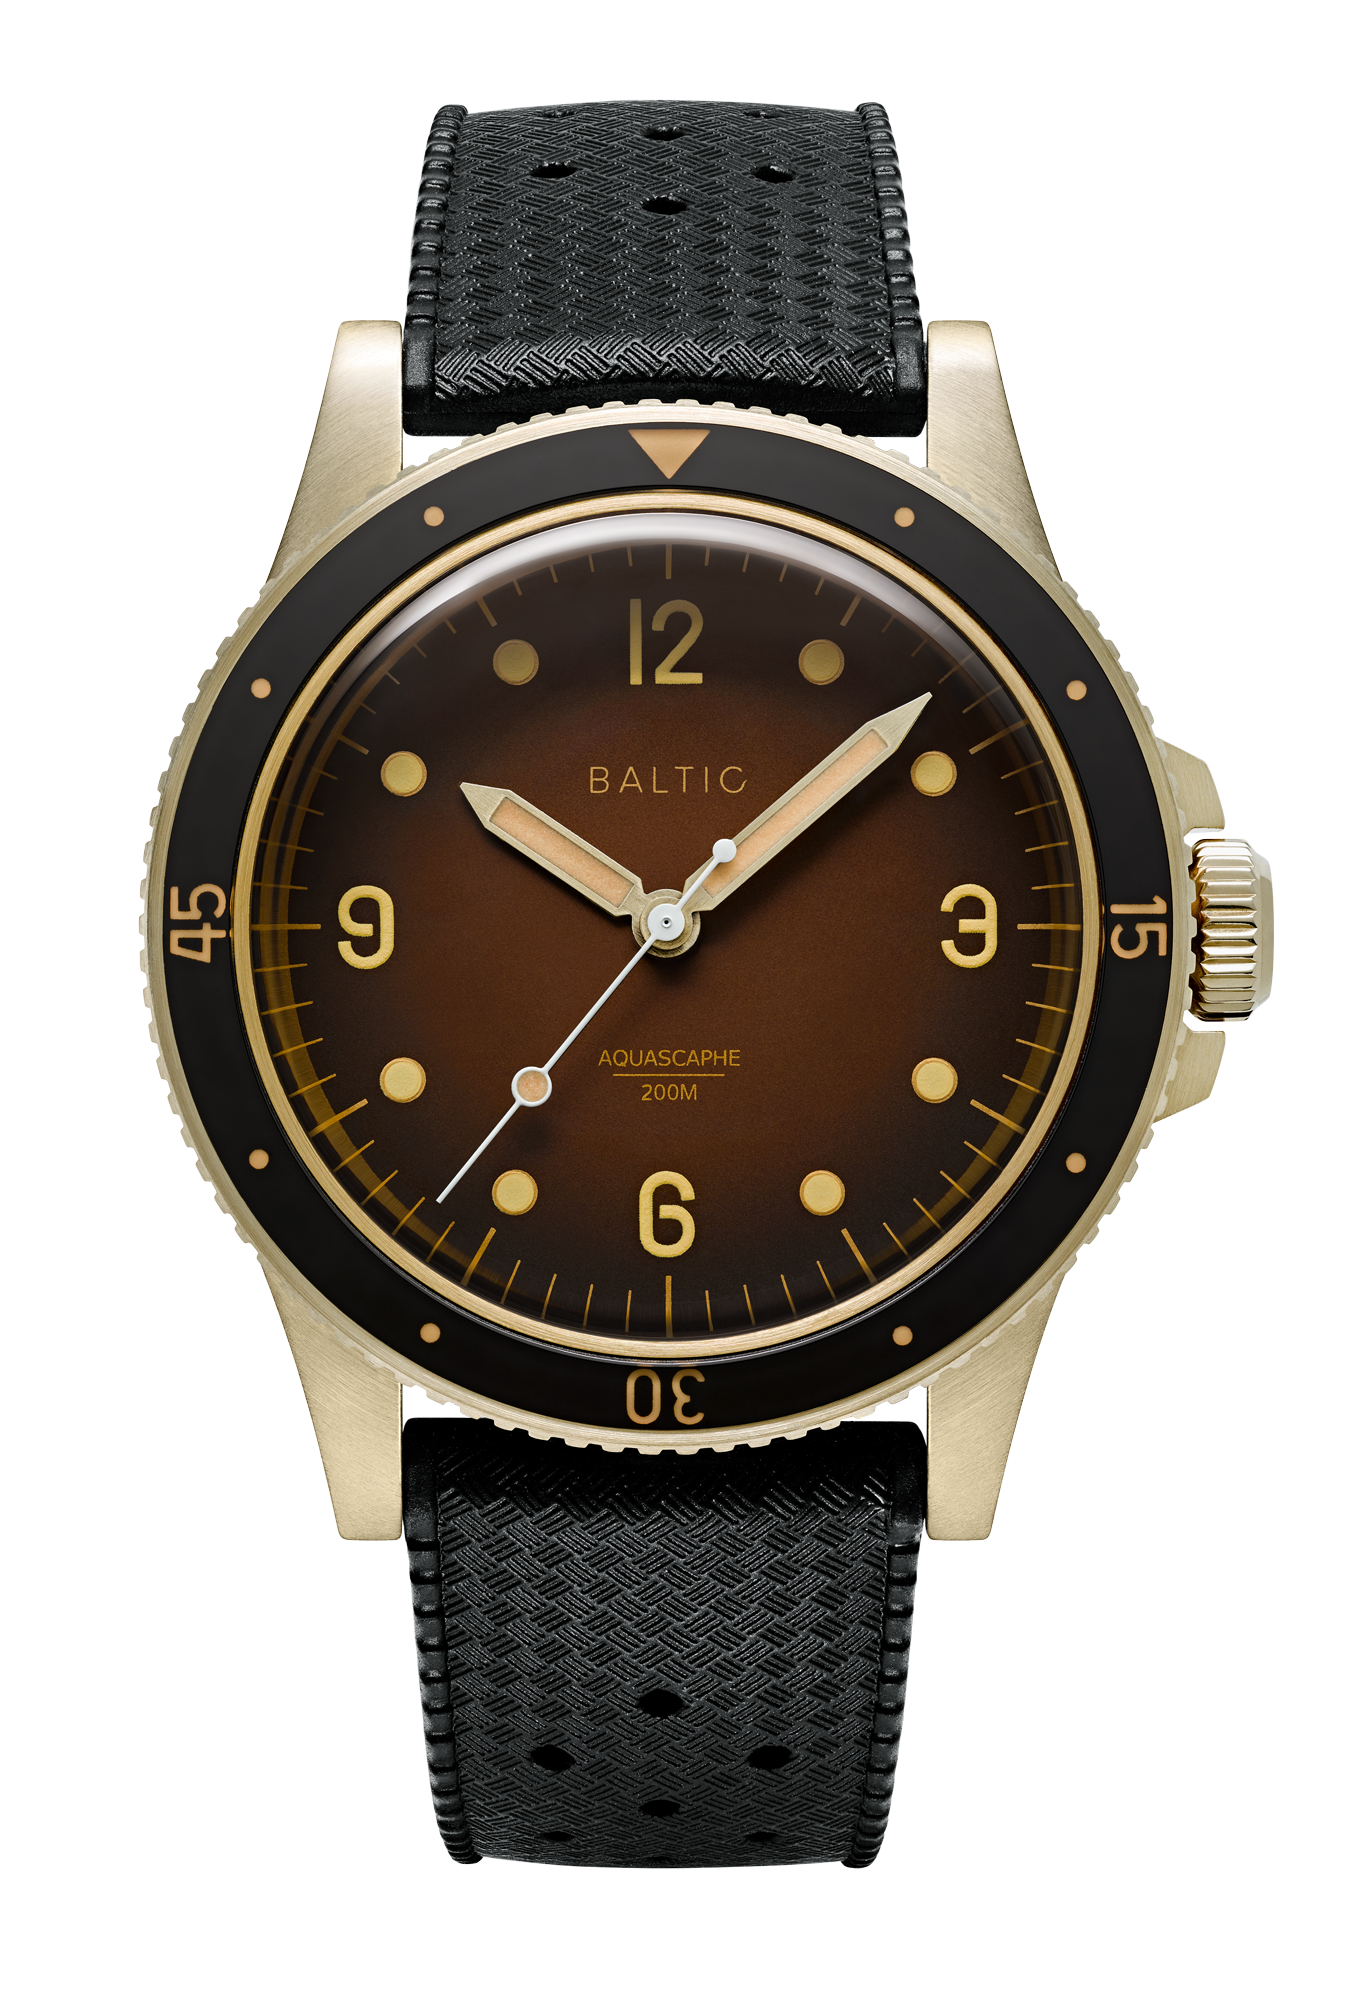 MR01 collection - Baltic Watches